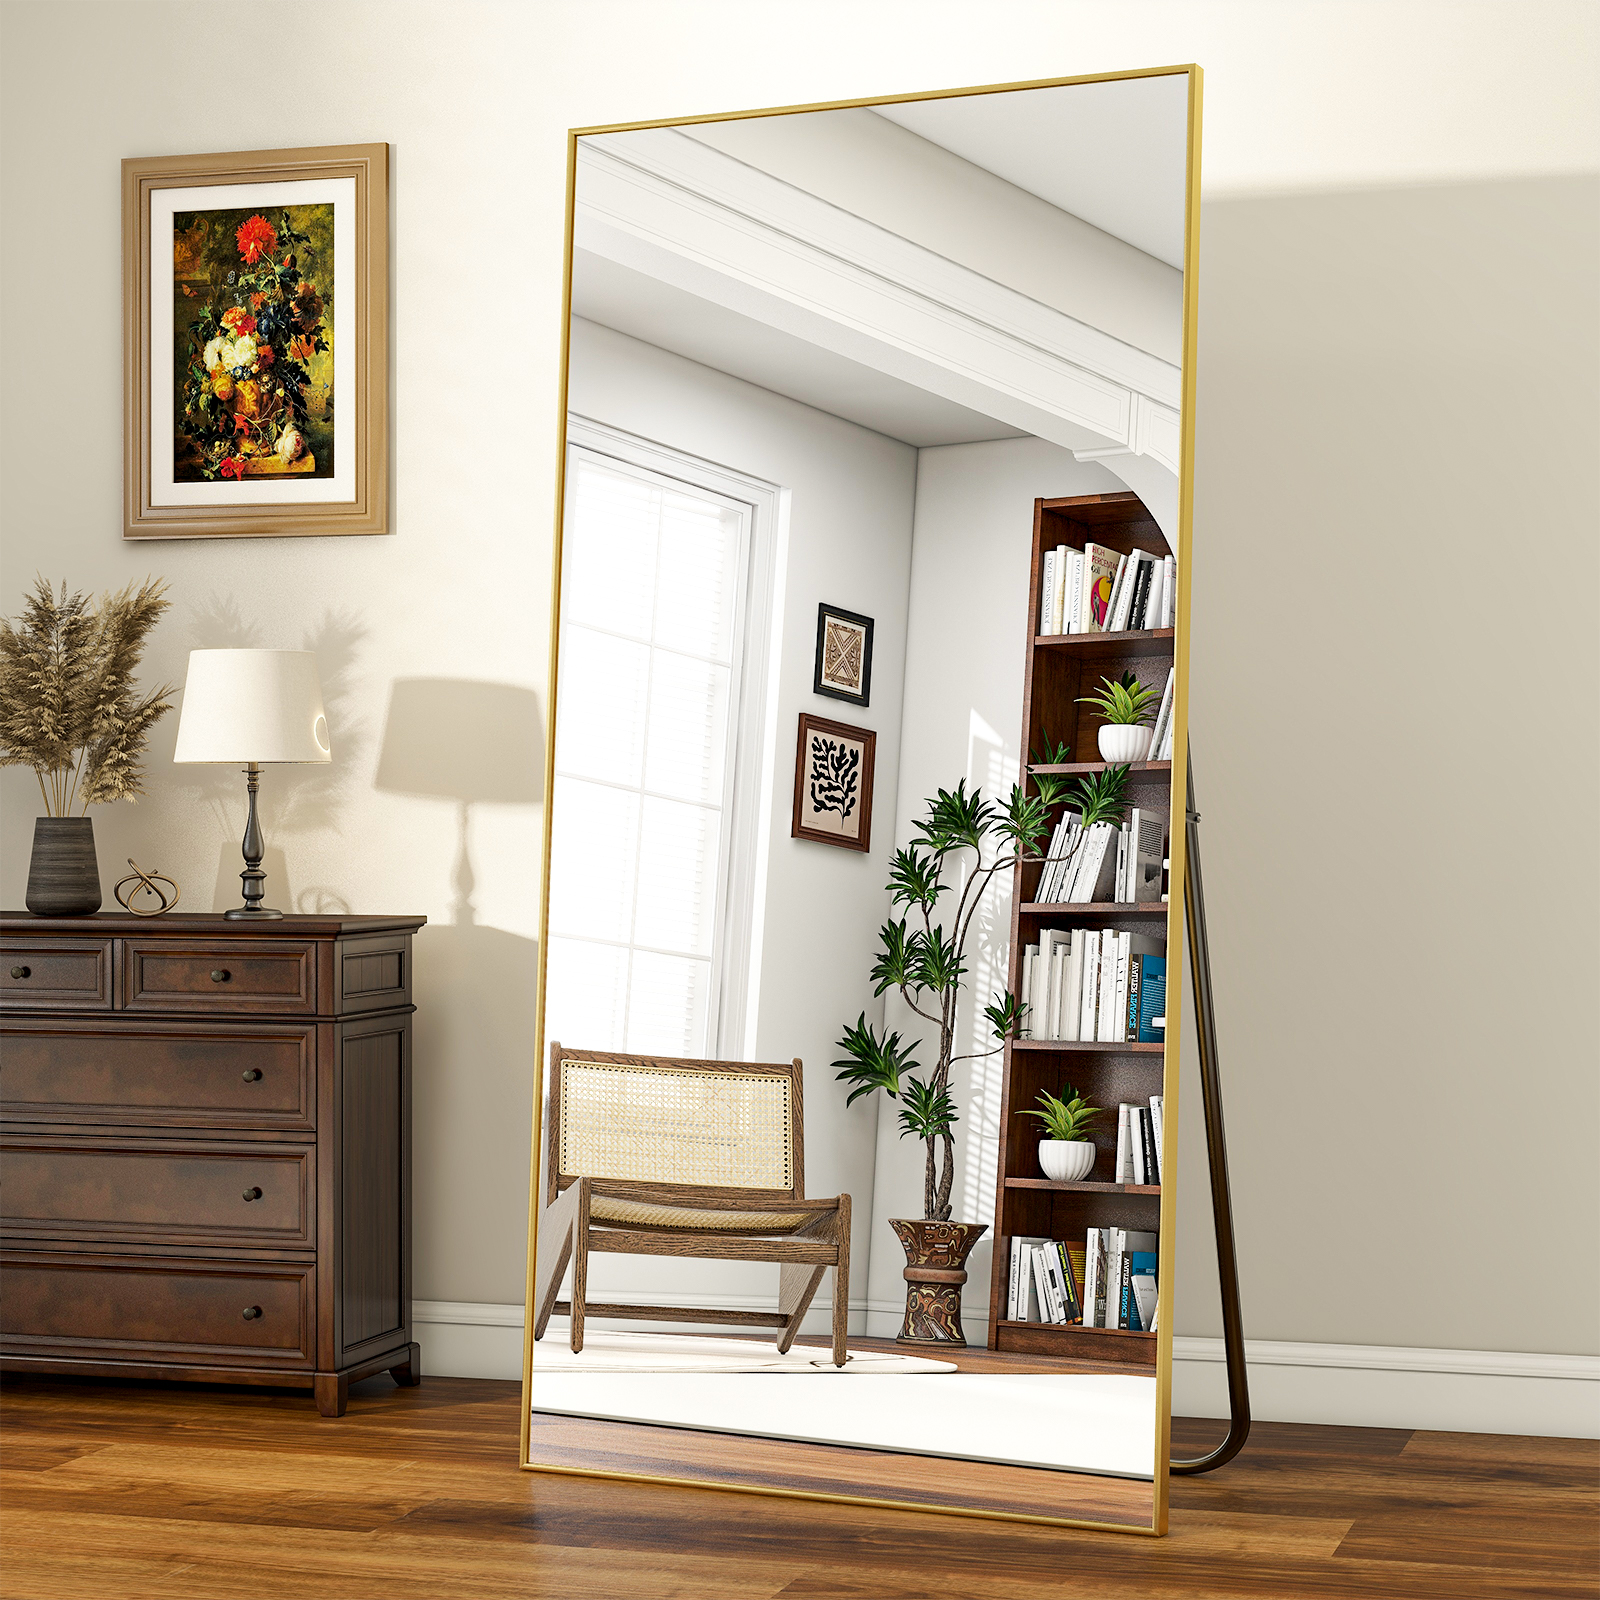 BEAUTYPEAK 76"x34" Full Length Mirror Rectangle Floor Mirrors for Standing Leaning or Hanging, Gold - image 1 of 6